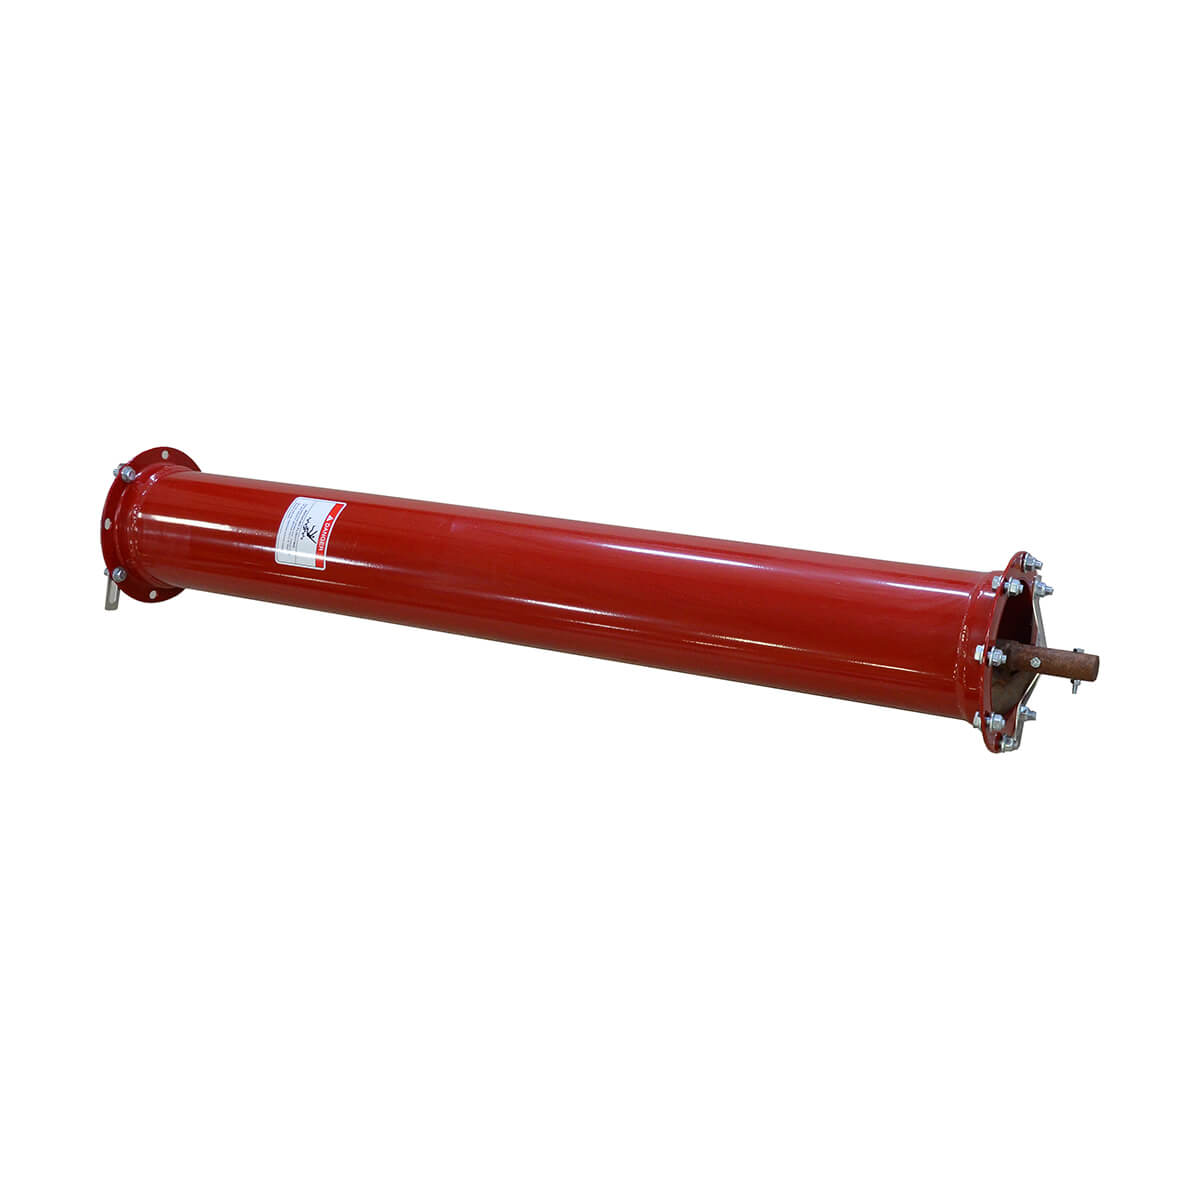 Meridian Utility Auger - 8 in X 5 FT